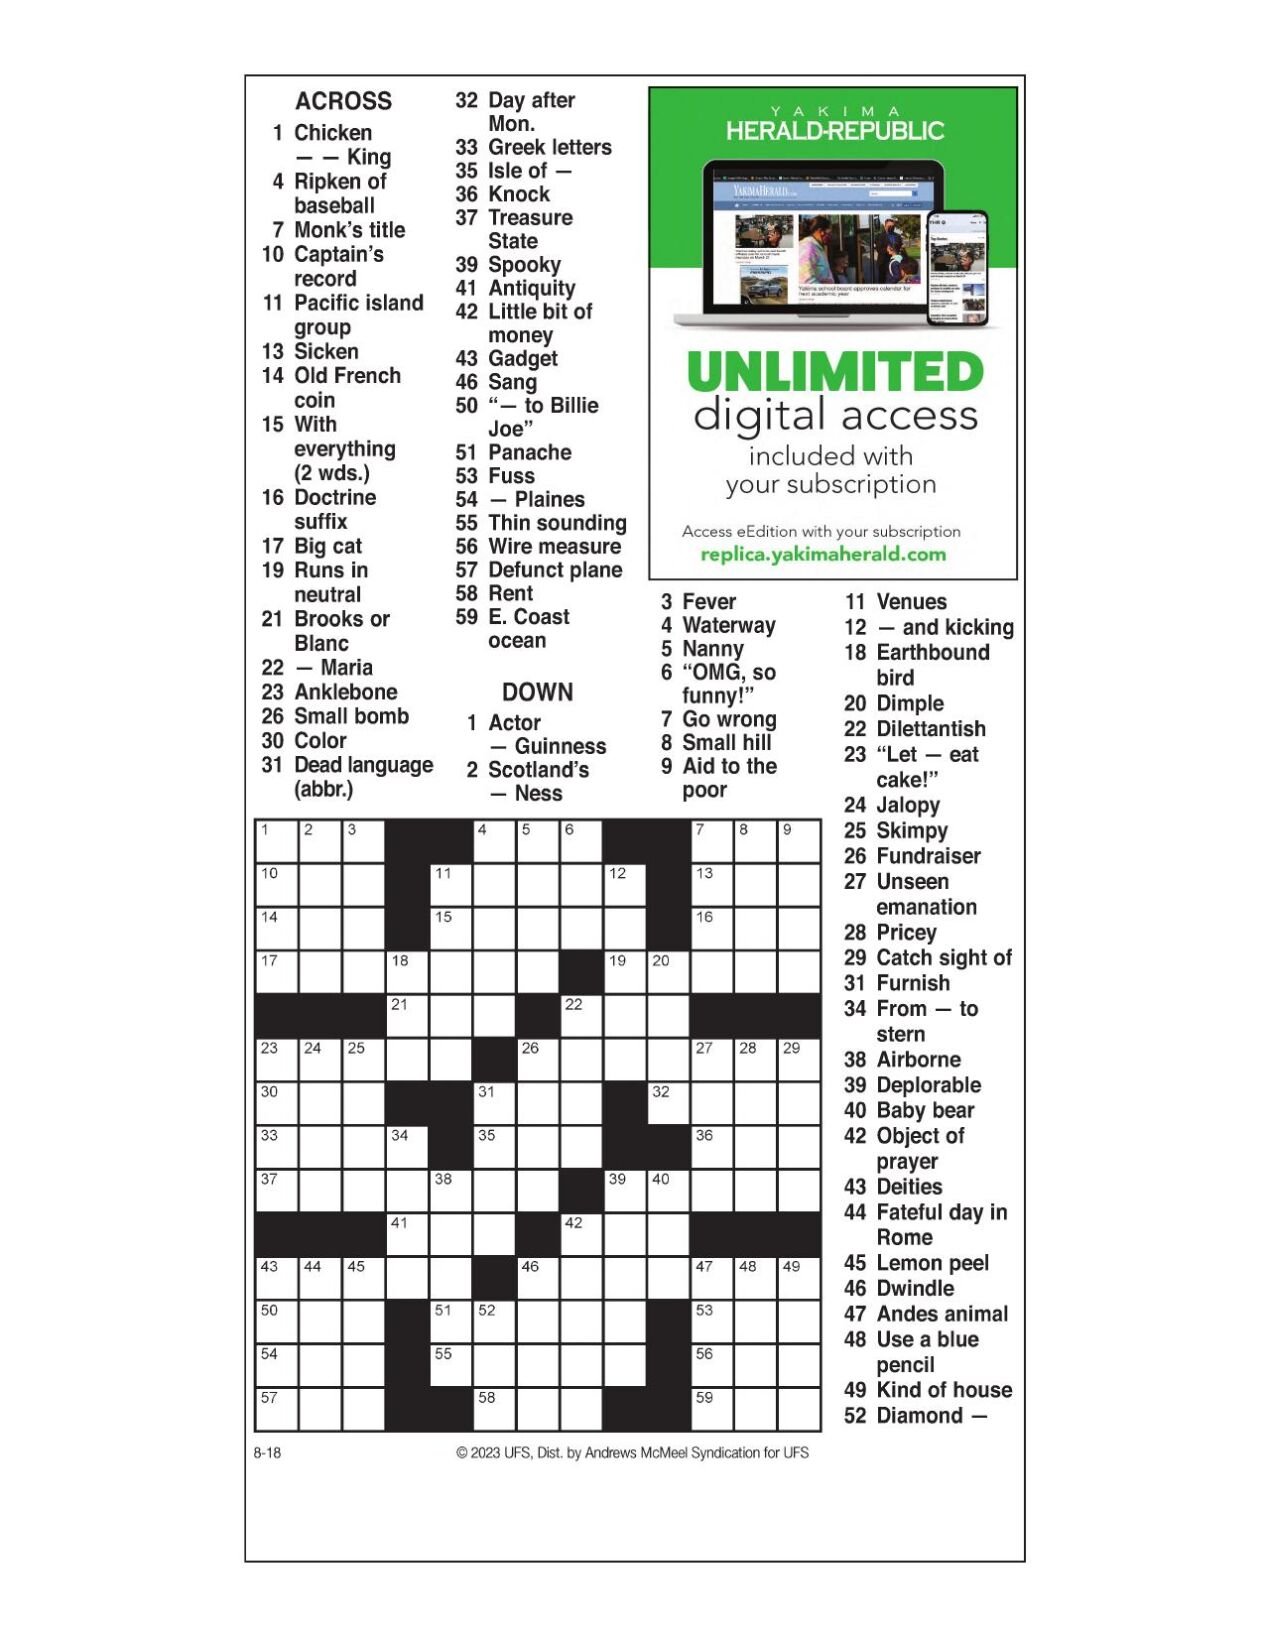 Crossword Puzzle Of The Week #2 (for Computer Science and Applications) -  GeeksforGeeks